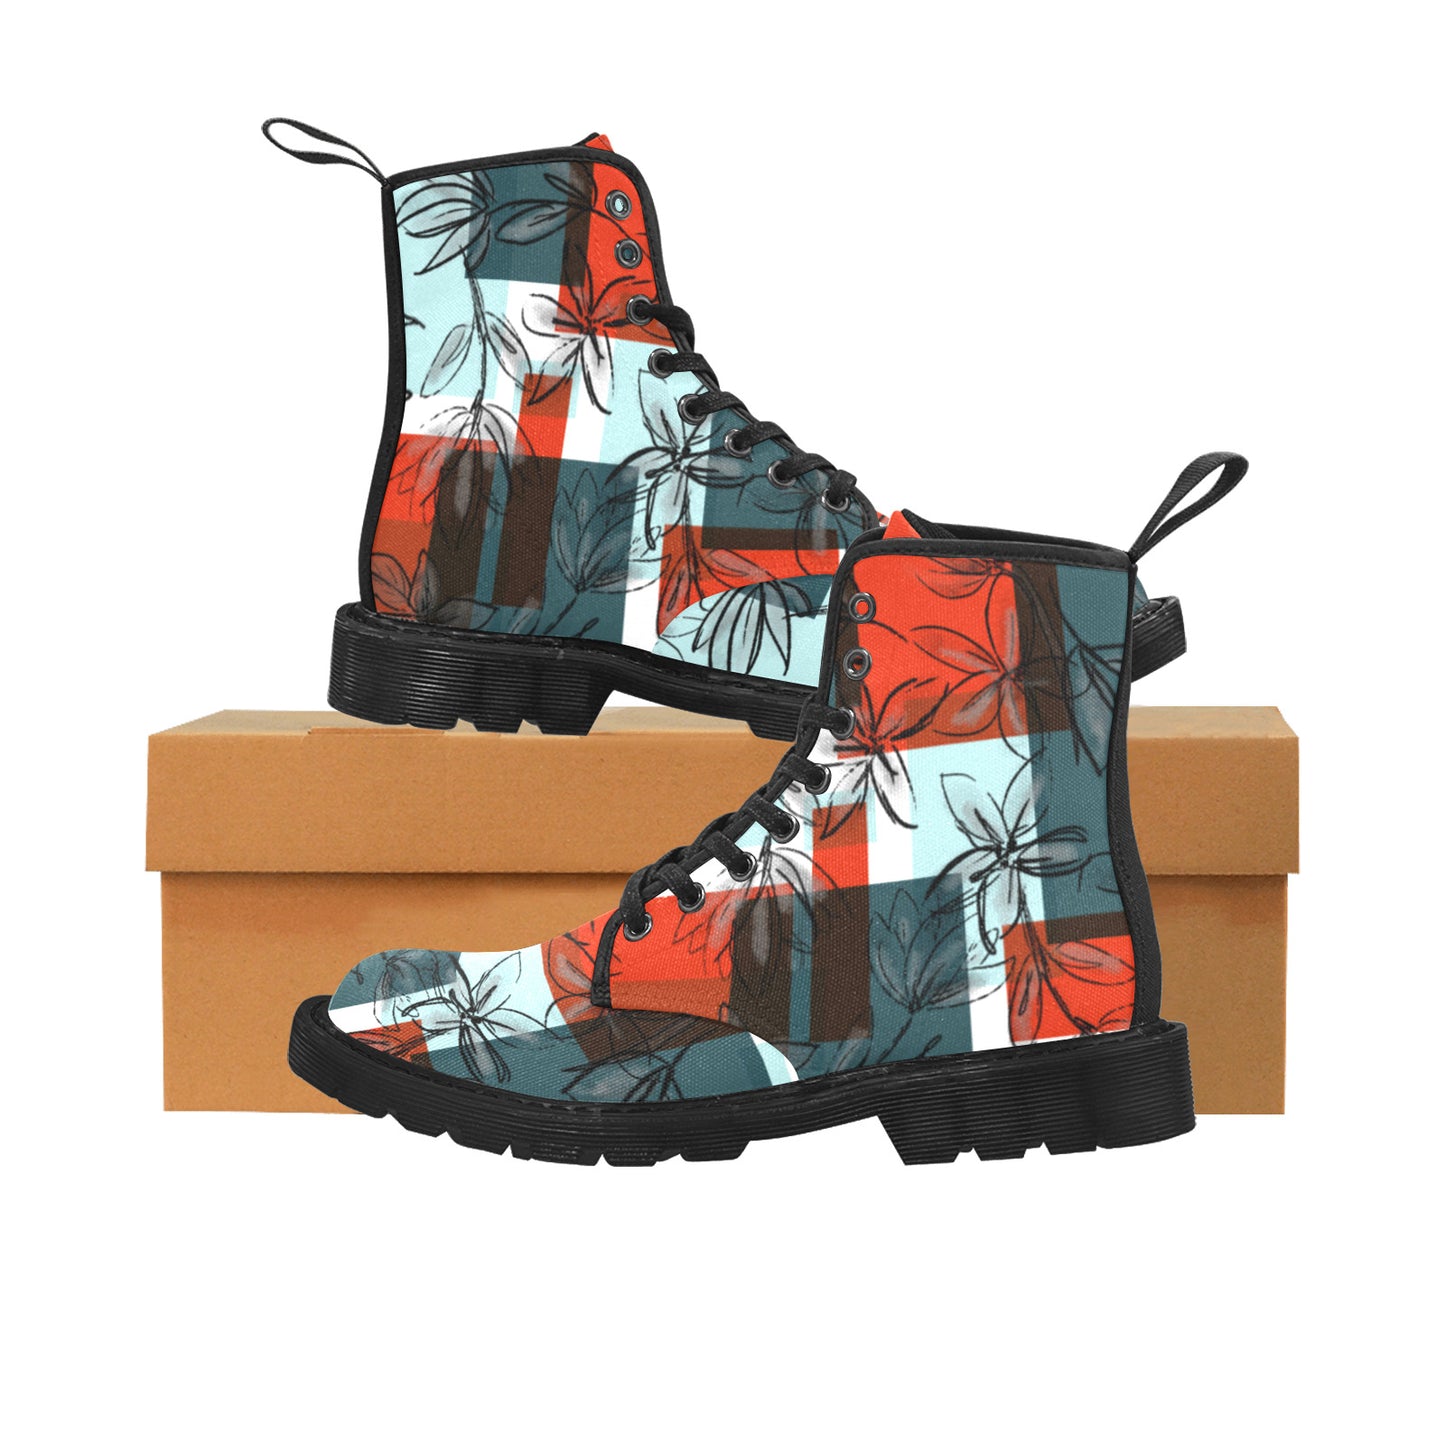 Sunset Sky Boots for Women